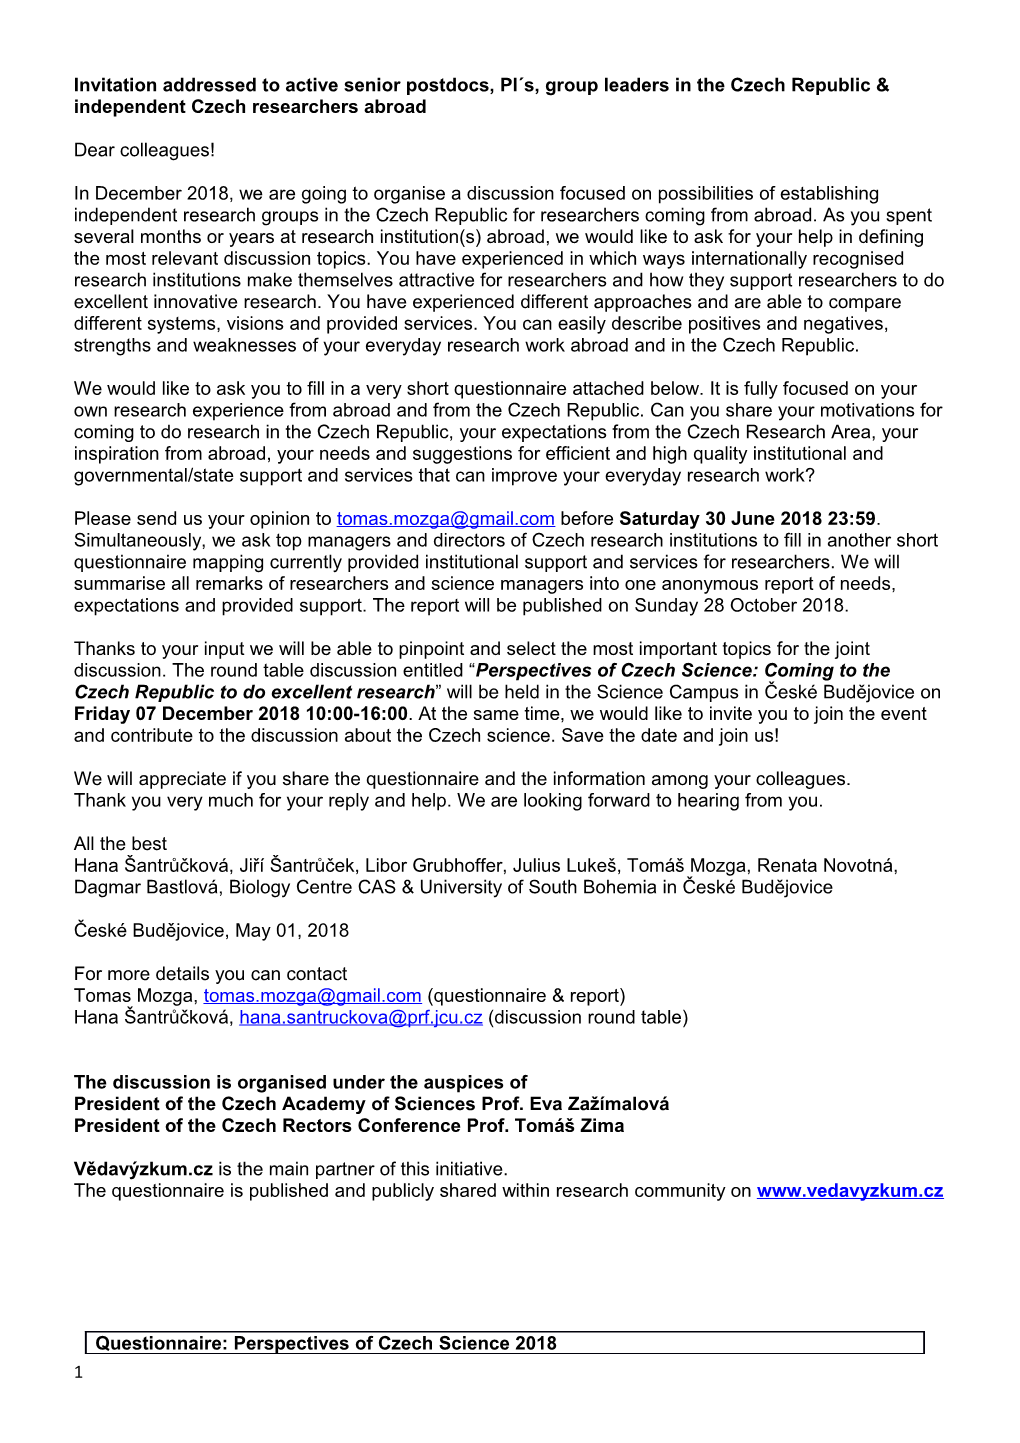 Invitation Addressed to Active Senior Postdocs, PI S, Group Leaders in the Czech